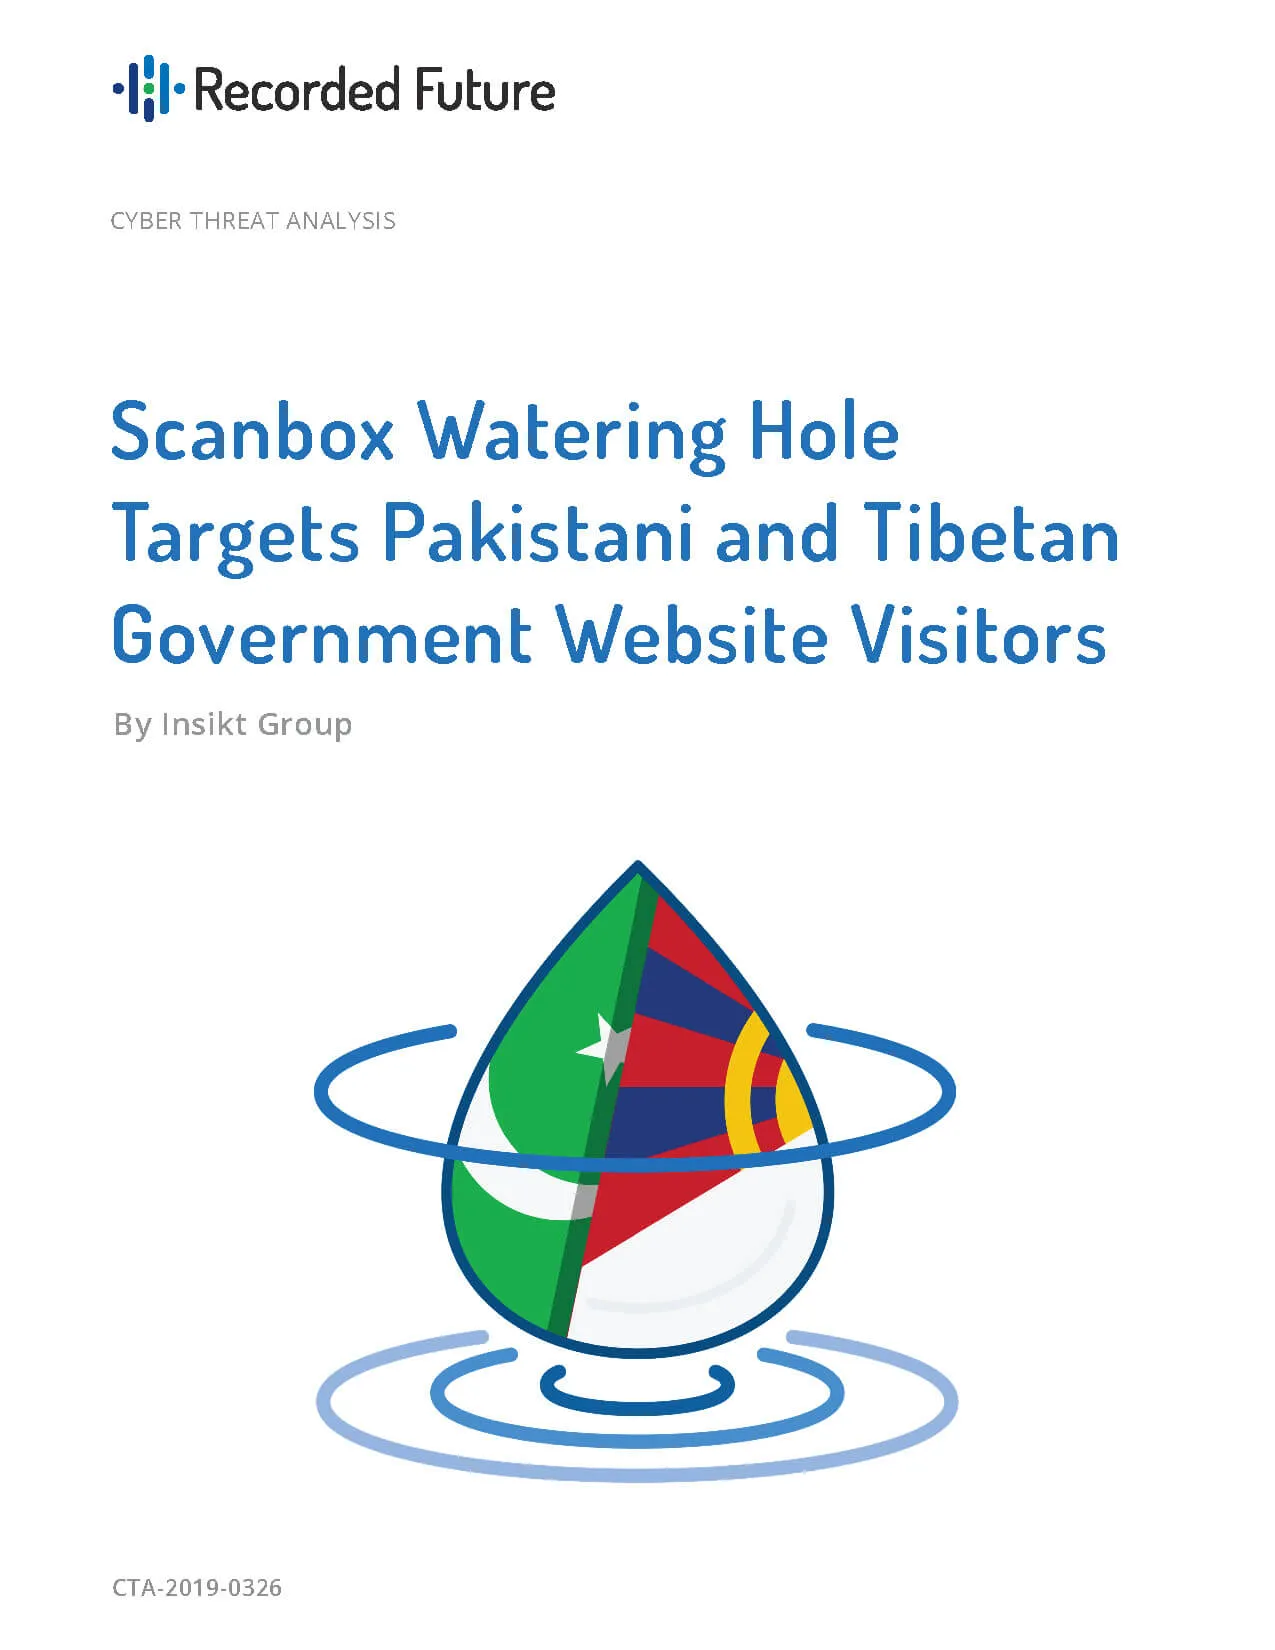 Scanbox Watering Hole Targets Pakistani and Tibetan Government Website Visitors